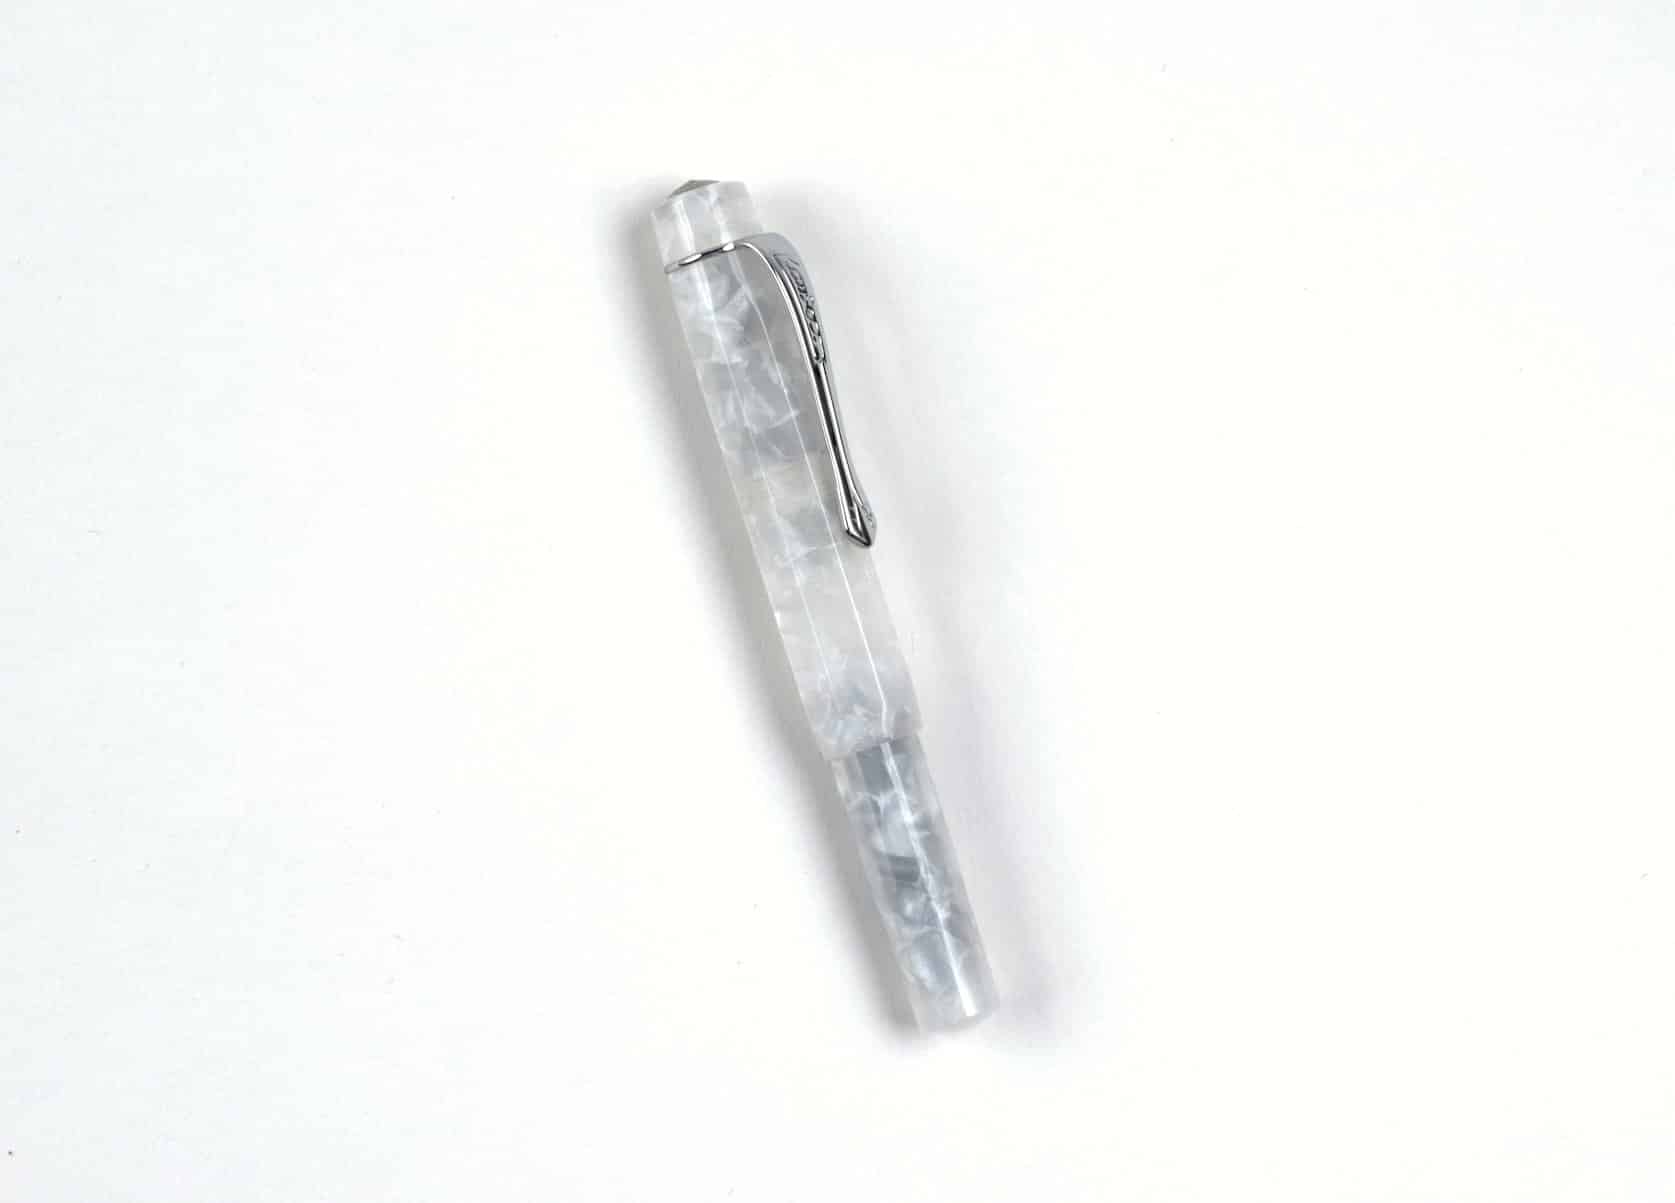 White fountain pen with mineral-like pattern and silver-coloured accents.